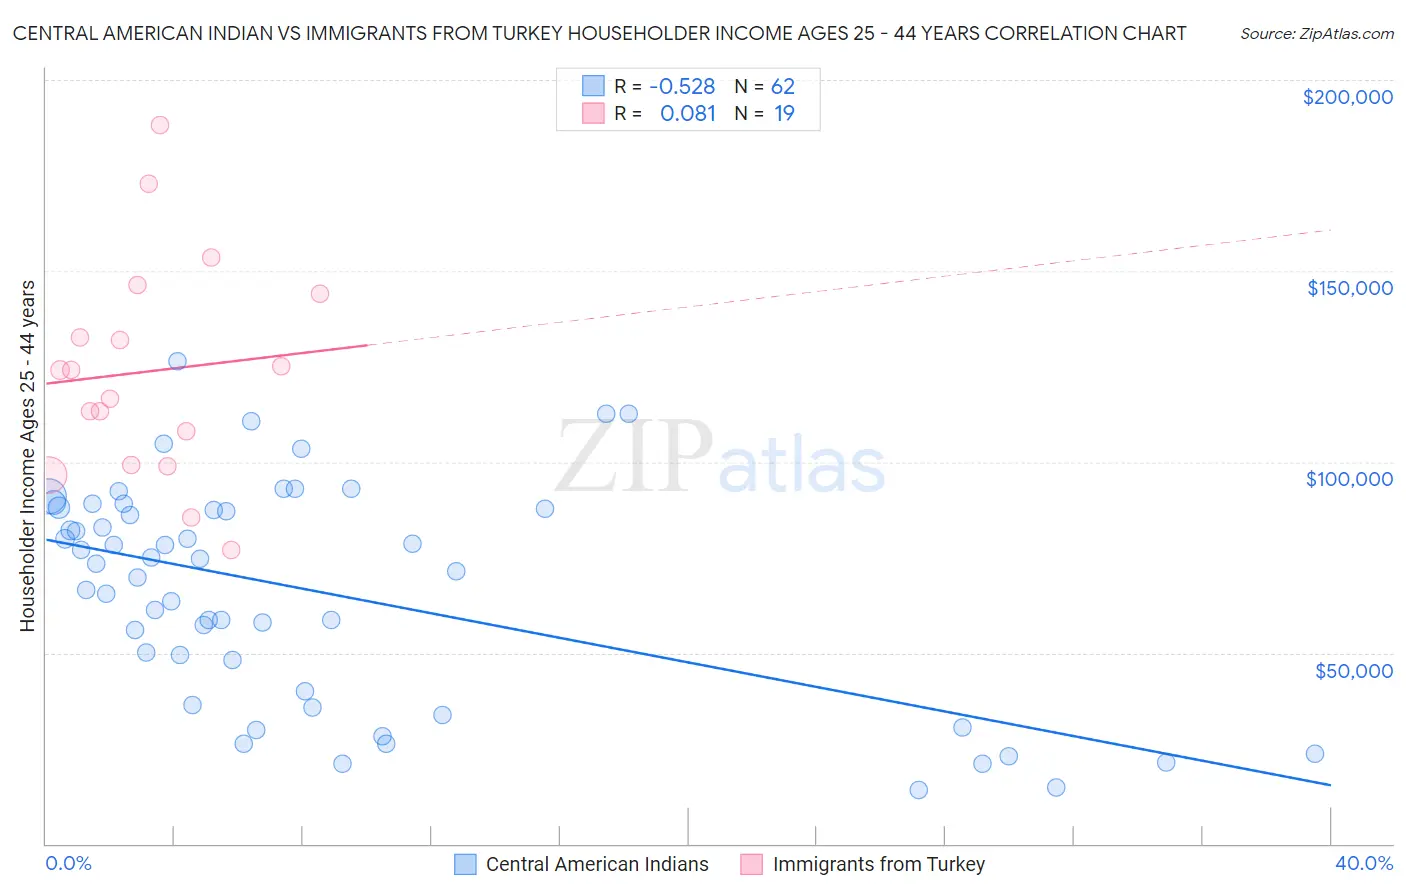 Central American Indian vs Immigrants from Turkey Householder Income Ages 25 - 44 years